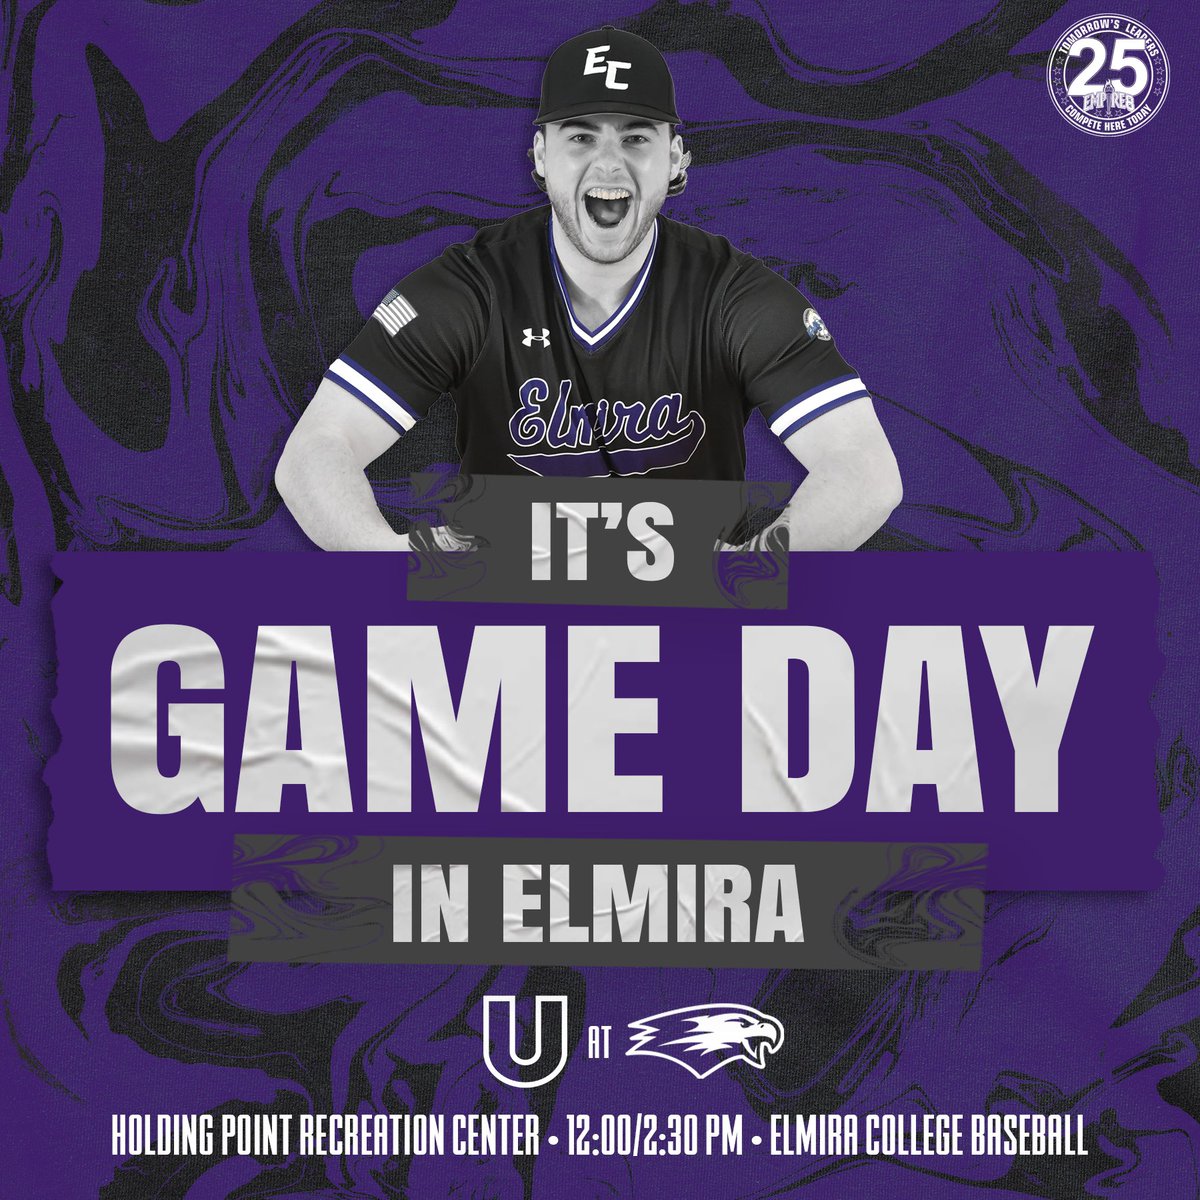 Elmira and Utica look to get ✌🏼 games in this afternoon as the regular season winds down for the Soaring Eagles! ⚾️🦅

🆚 Utica
🕛 12:00/2:30 PM 
📍 Horseheads, NY | Holding Point
📺 & 📊: bit.ly/3lKw2jp

#TogetherWeFly #FightOn4EC #ElmiraProud